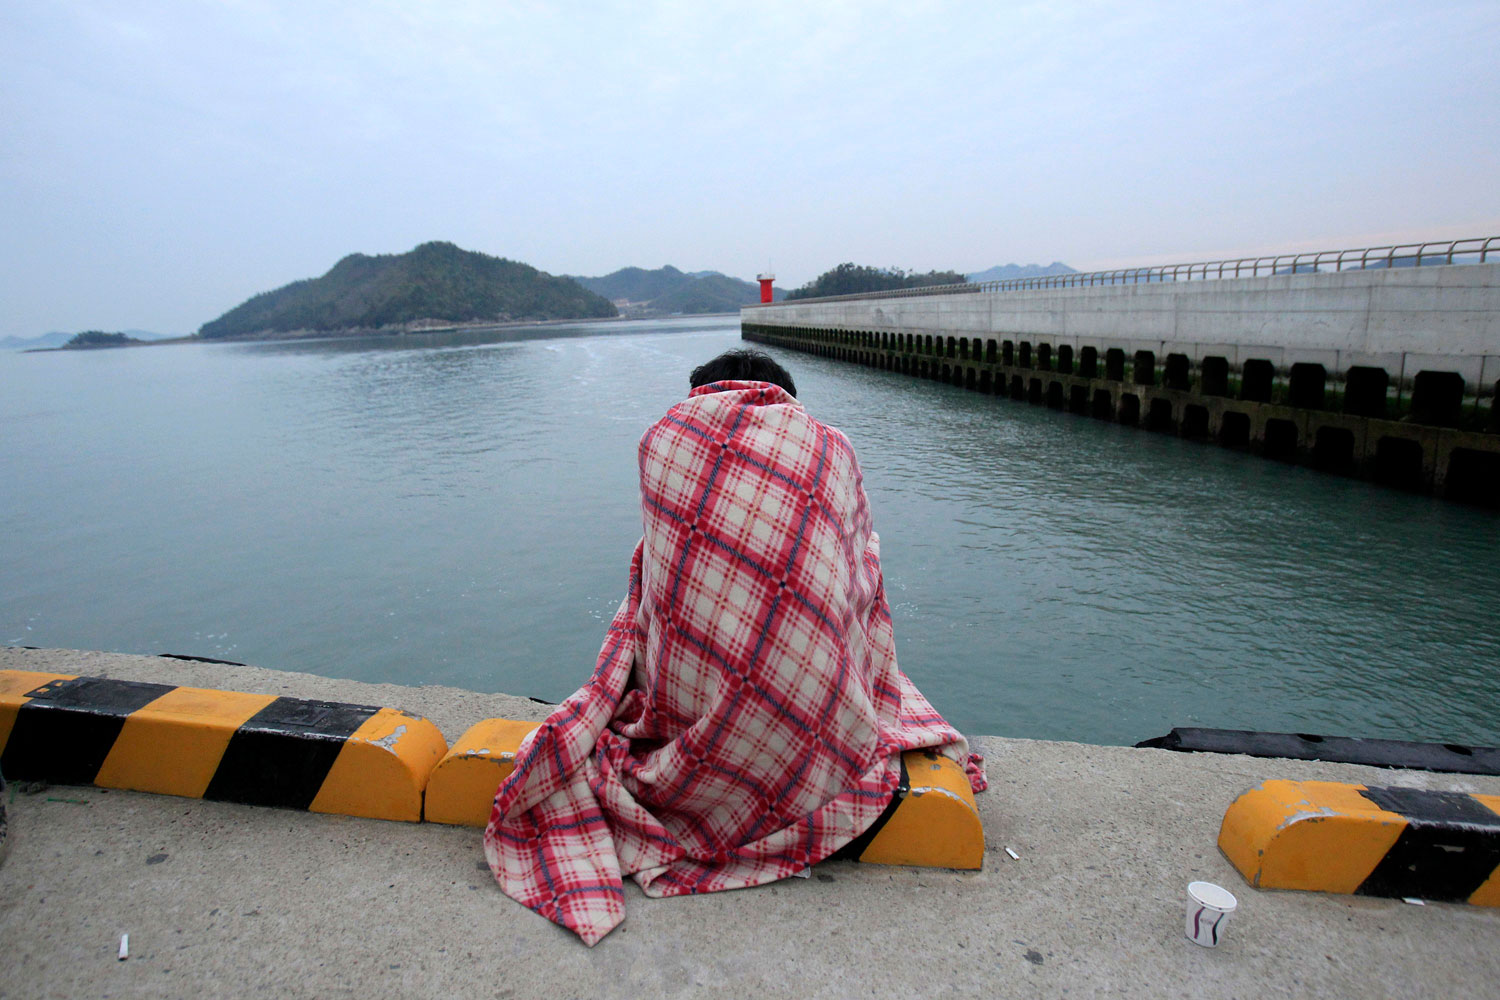 A relative waits for their missing loved one at a port in Jindo, South Korea, April 16, 2014 following the capsizing of the South Korean ferry Sewol.